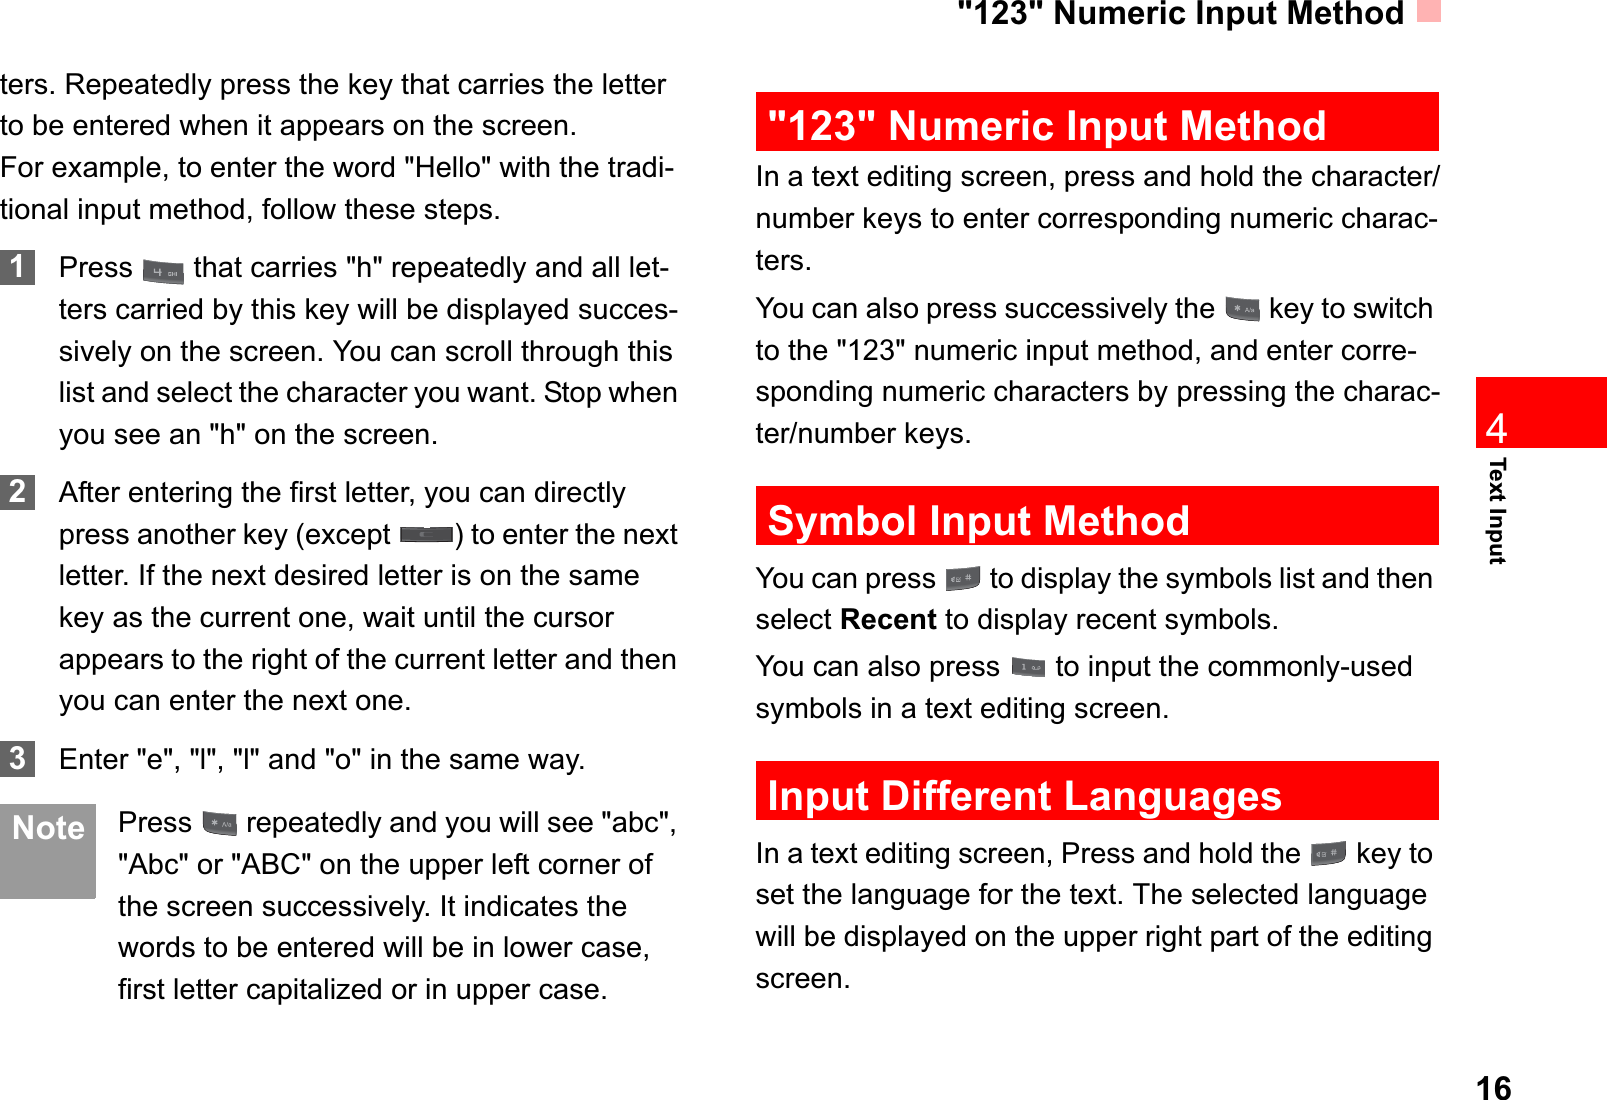 &quot;123&quot; Numeric Input Method16Text Input4ters. Repeatedly press the key that carries the letter to be entered when it appears on the screen.For example, to enter the word &quot;Hello&quot; with the tradi-tional input method, follow these steps.1Press   that carries &quot;h&quot; repeatedly and all let-ters carried by this key will be displayed succes-sively on the screen. You can scroll through this list and select the character you want. Stop when you see an &quot;h&quot; on the screen.2After entering the first letter, you can directly press another key (except  ) to enter the next letter. If the next desired letter is on the same key as the current one, wait until the cursor appears to the right of the current letter and then you can enter the next one. 3Enter &quot;e&quot;, &quot;l&quot;, &quot;l&quot; and &quot;o&quot; in the same way. Note Press   repeatedly and you will see &quot;abc&quot;, &quot;Abc&quot; or &quot;ABC&quot; on the upper left corner of the screen successively. It indicates the words to be entered will be in lower case, first letter capitalized or in upper case.&quot;123&quot; Numeric Input MethodIn a text editing screen, press and hold the character/number keys to enter corresponding numeric charac-ters.You can also press successively the   key to switch to the &quot;123&quot; numeric input method, and enter corre-sponding numeric characters by pressing the charac-ter/number keys.Symbol Input MethodYou can press   to display the symbols list and then select Recent to display recent symbols.You can also press   to input the commonly-used symbols in a text editing screen.Input Different LanguagesIn a text editing screen, Press and hold the   key to set the language for the text. The selected language will be displayed on the upper right part of the editing screen. 